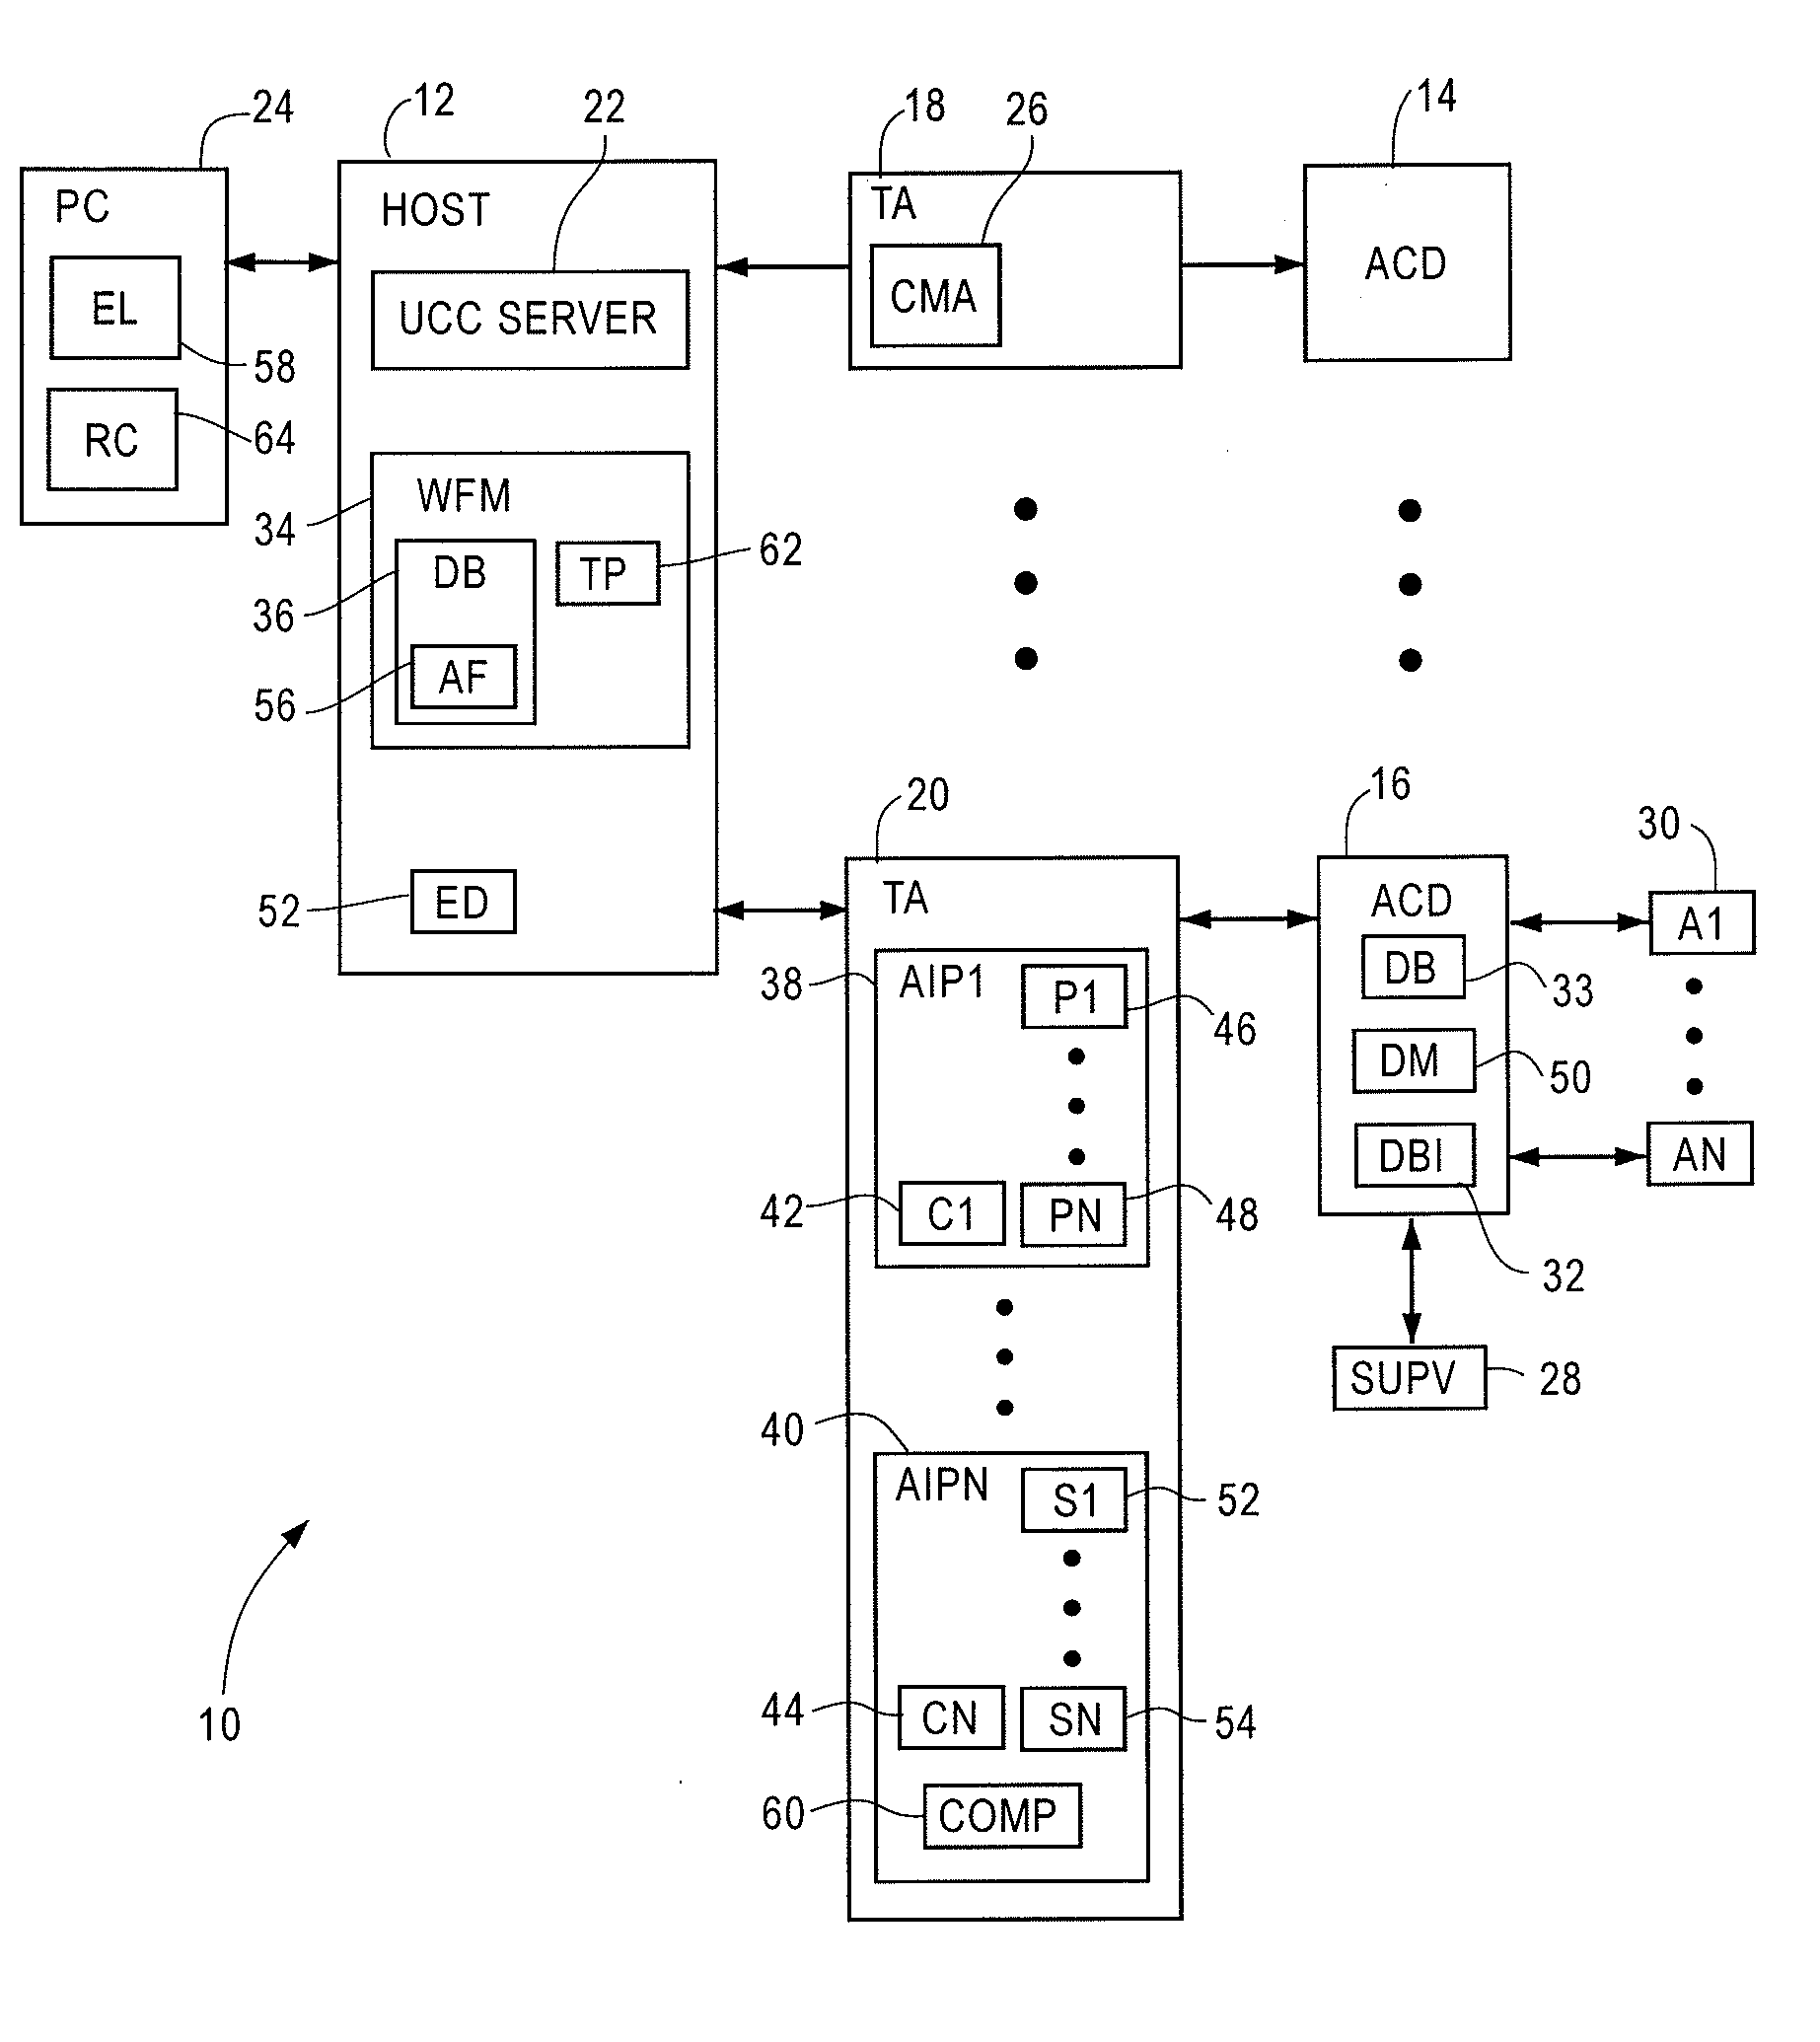 Synchronization of Data Within An ACD System